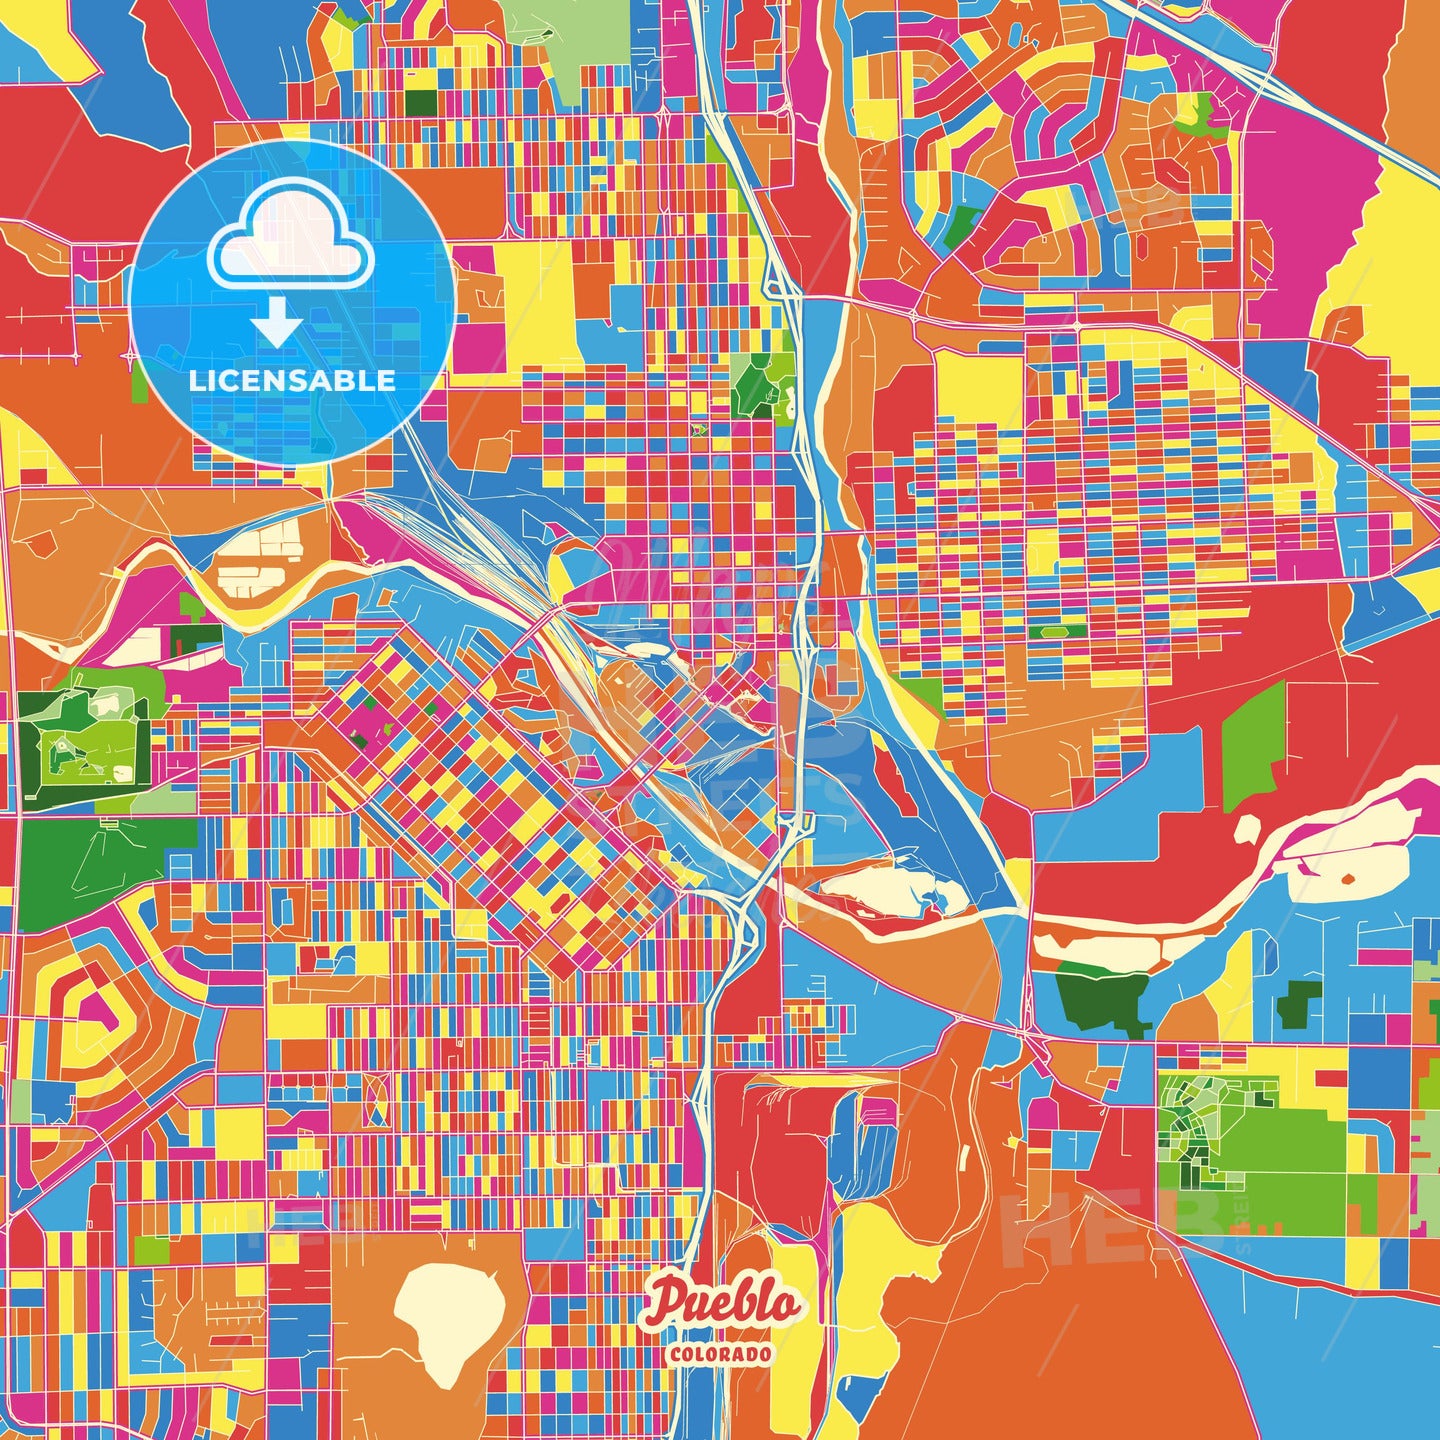 Pueblo, United States Crazy Colorful Street Map Poster Template - HEBSTREITS Sketches